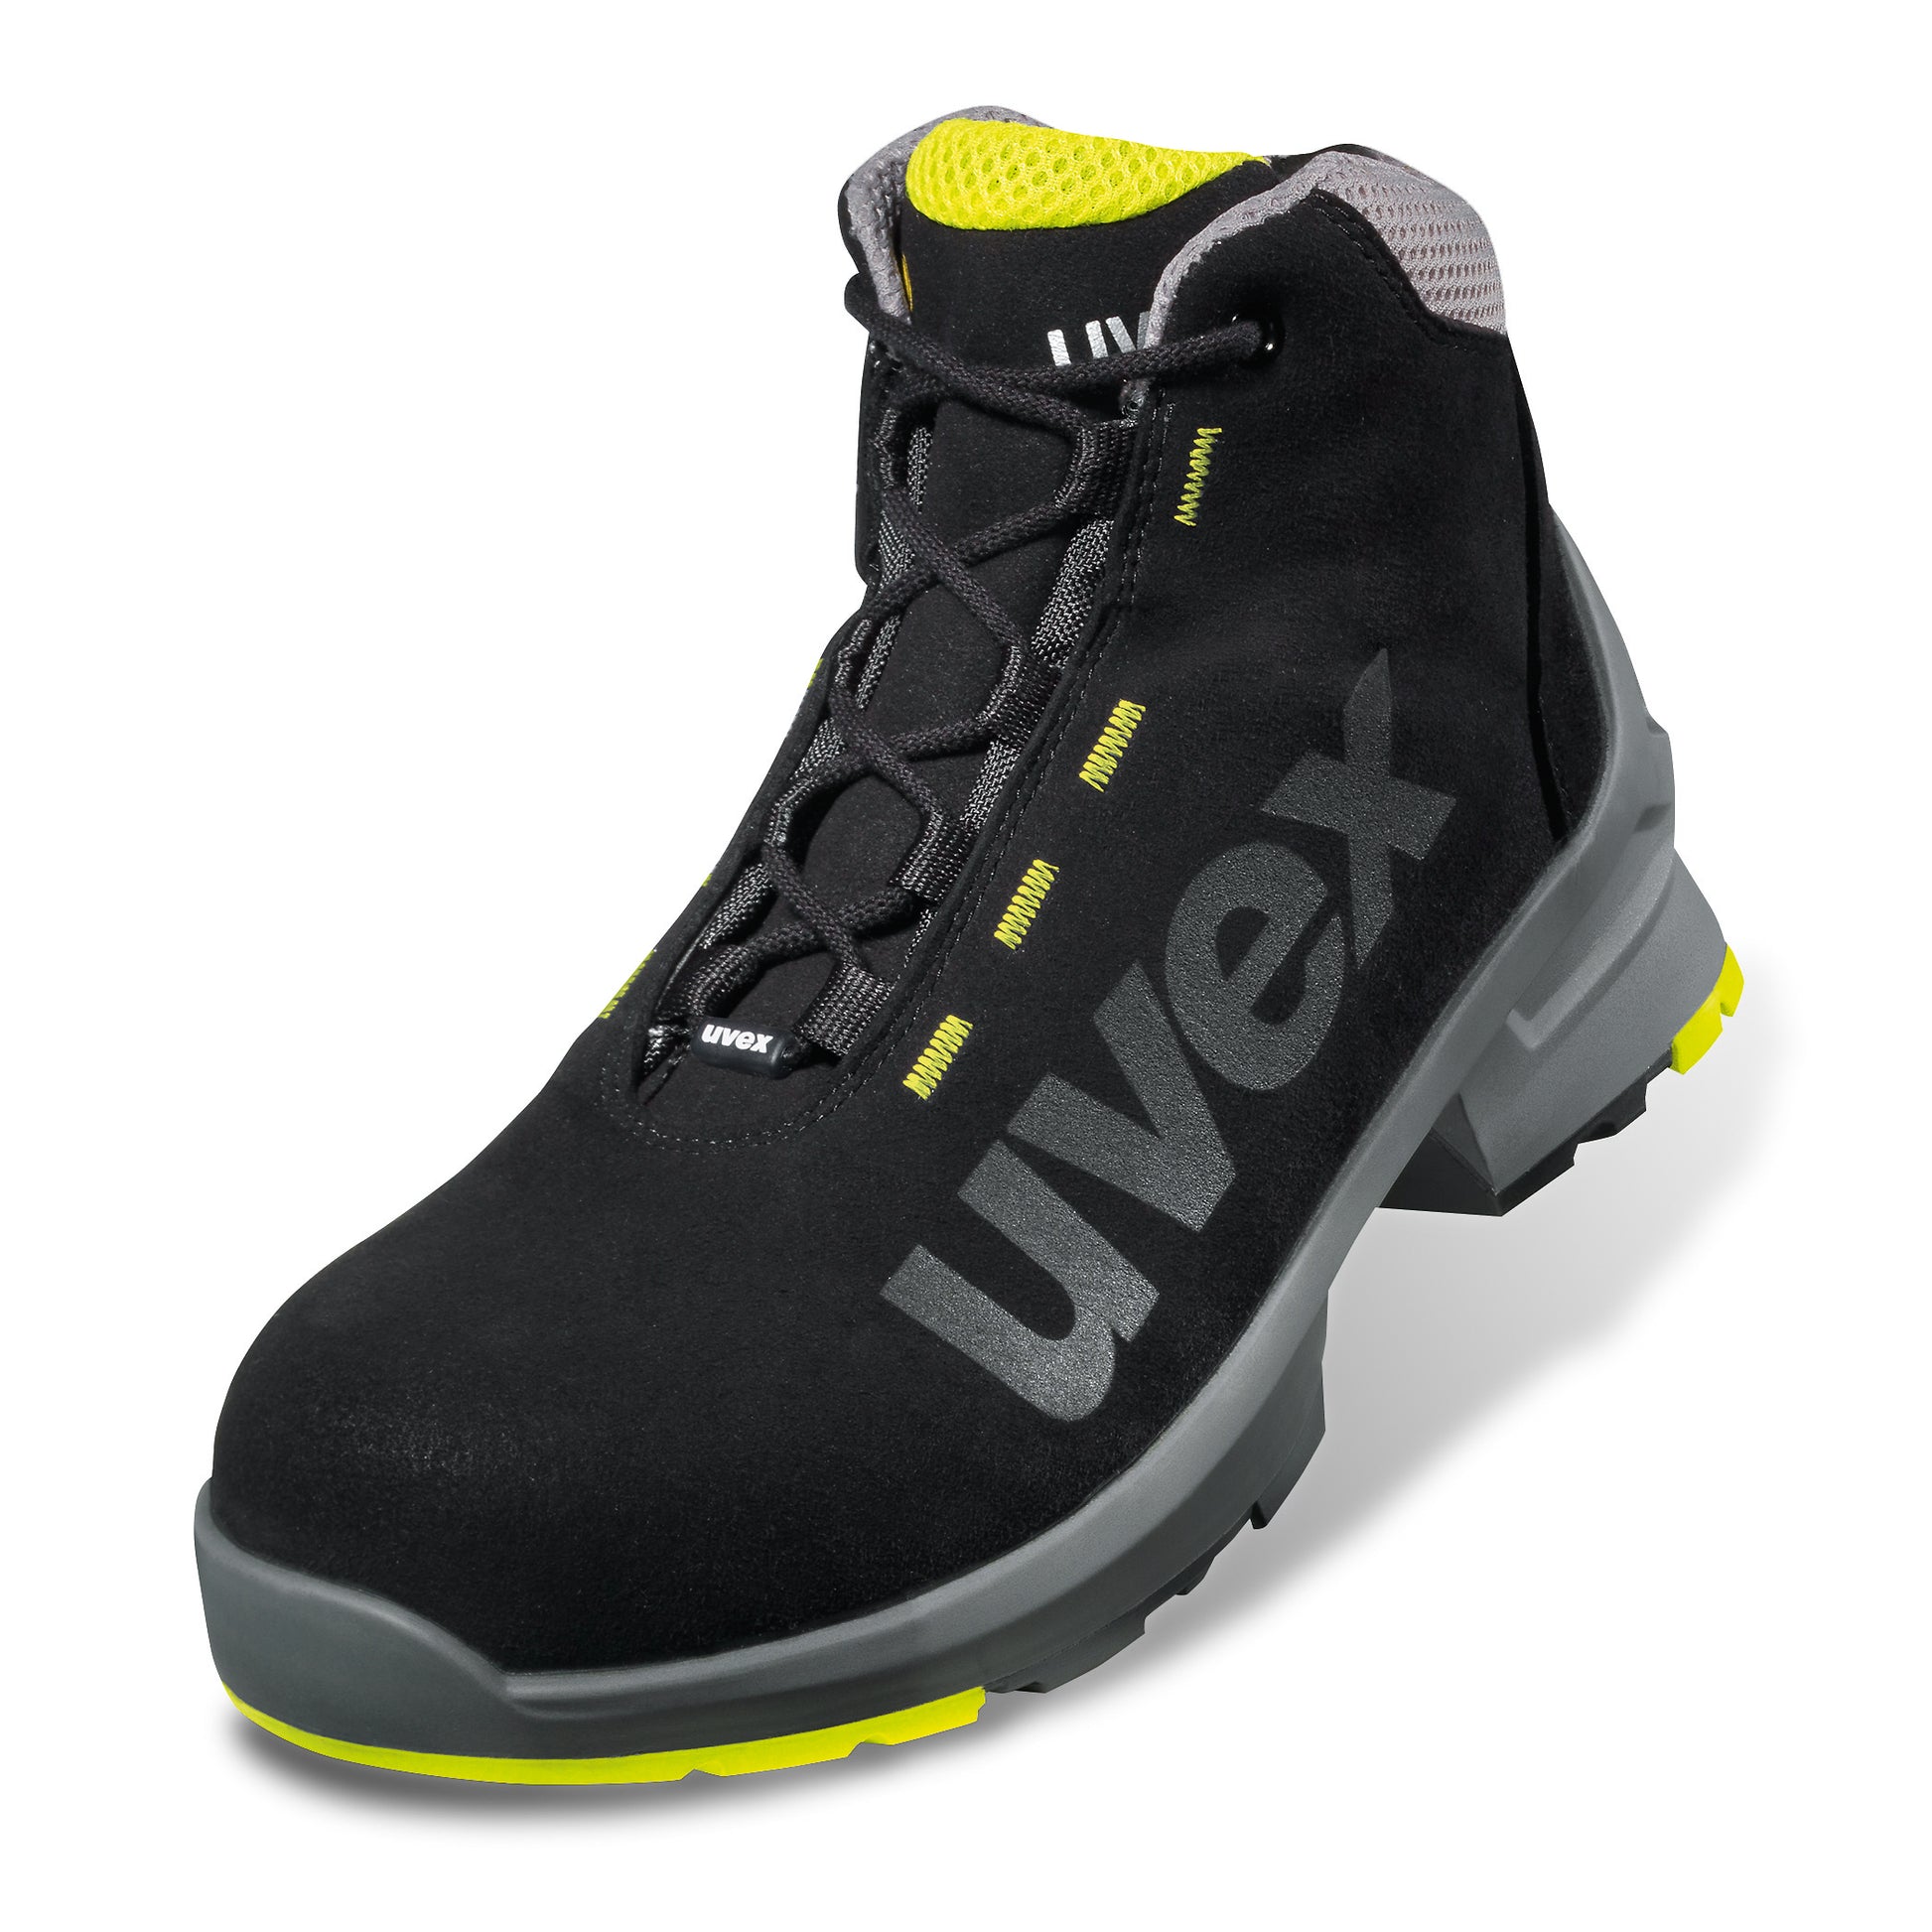 uvex 1 safety boots 85458 Black/Yellow Microsuede Upper. S2 SRC, ESD Rated. protexU